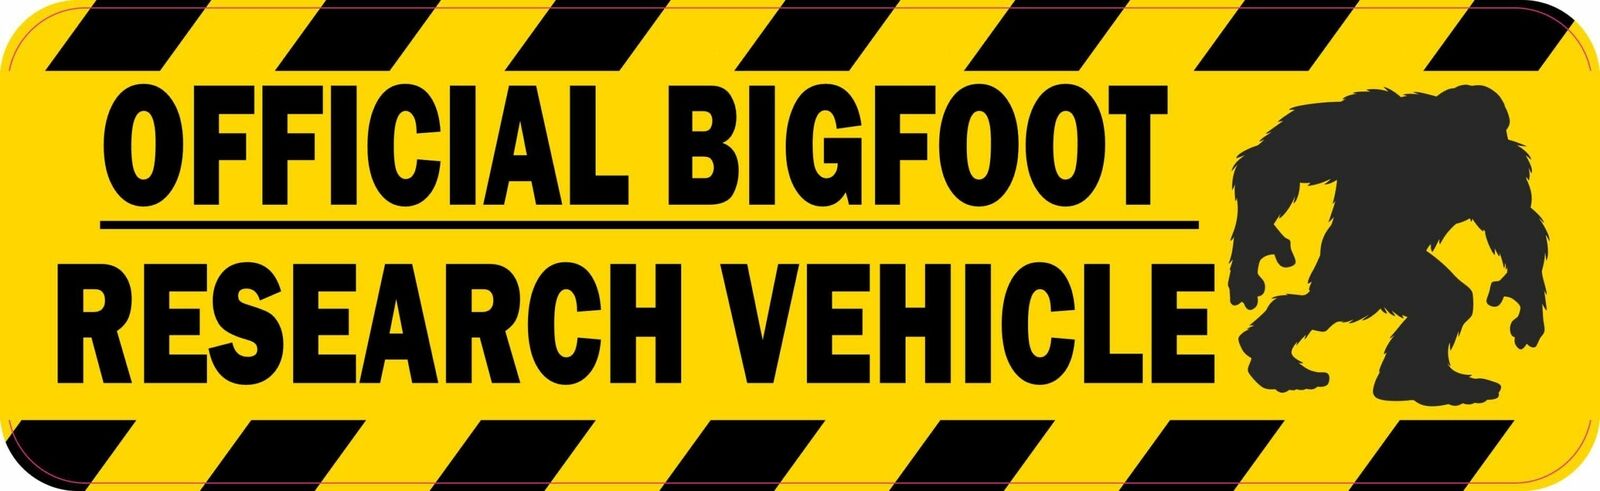 10in x 3in Official Bigfoot Research Vehicle Magnet Car Truck Magnetic Sign